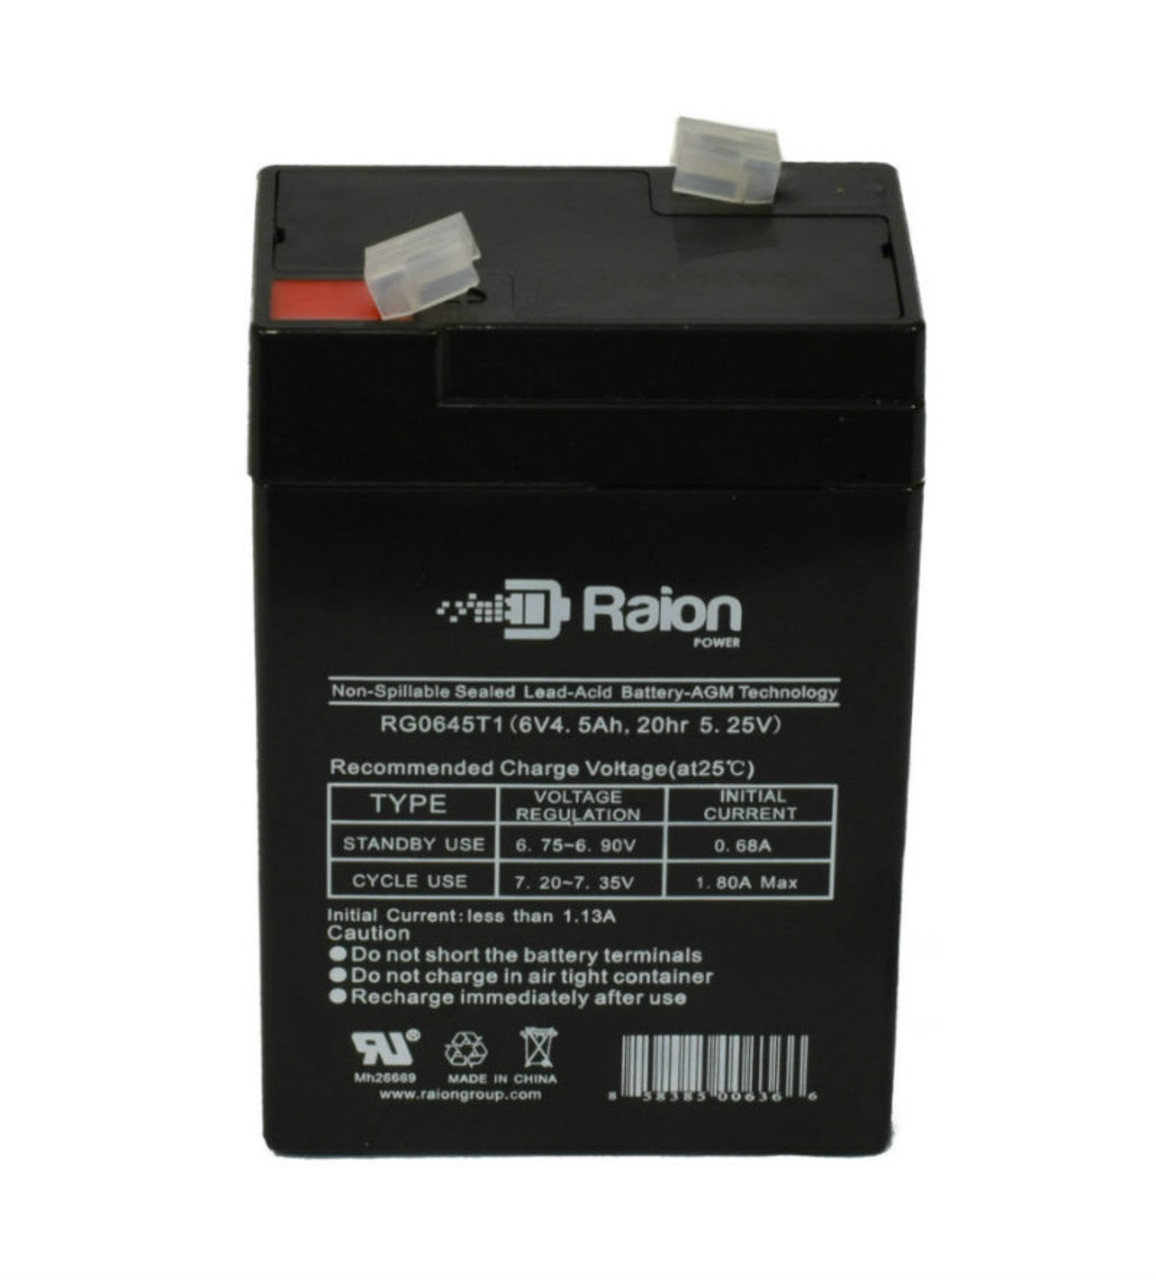 Raion Power RG0645T1 Replacement Battery Cartridge for Telong TL660